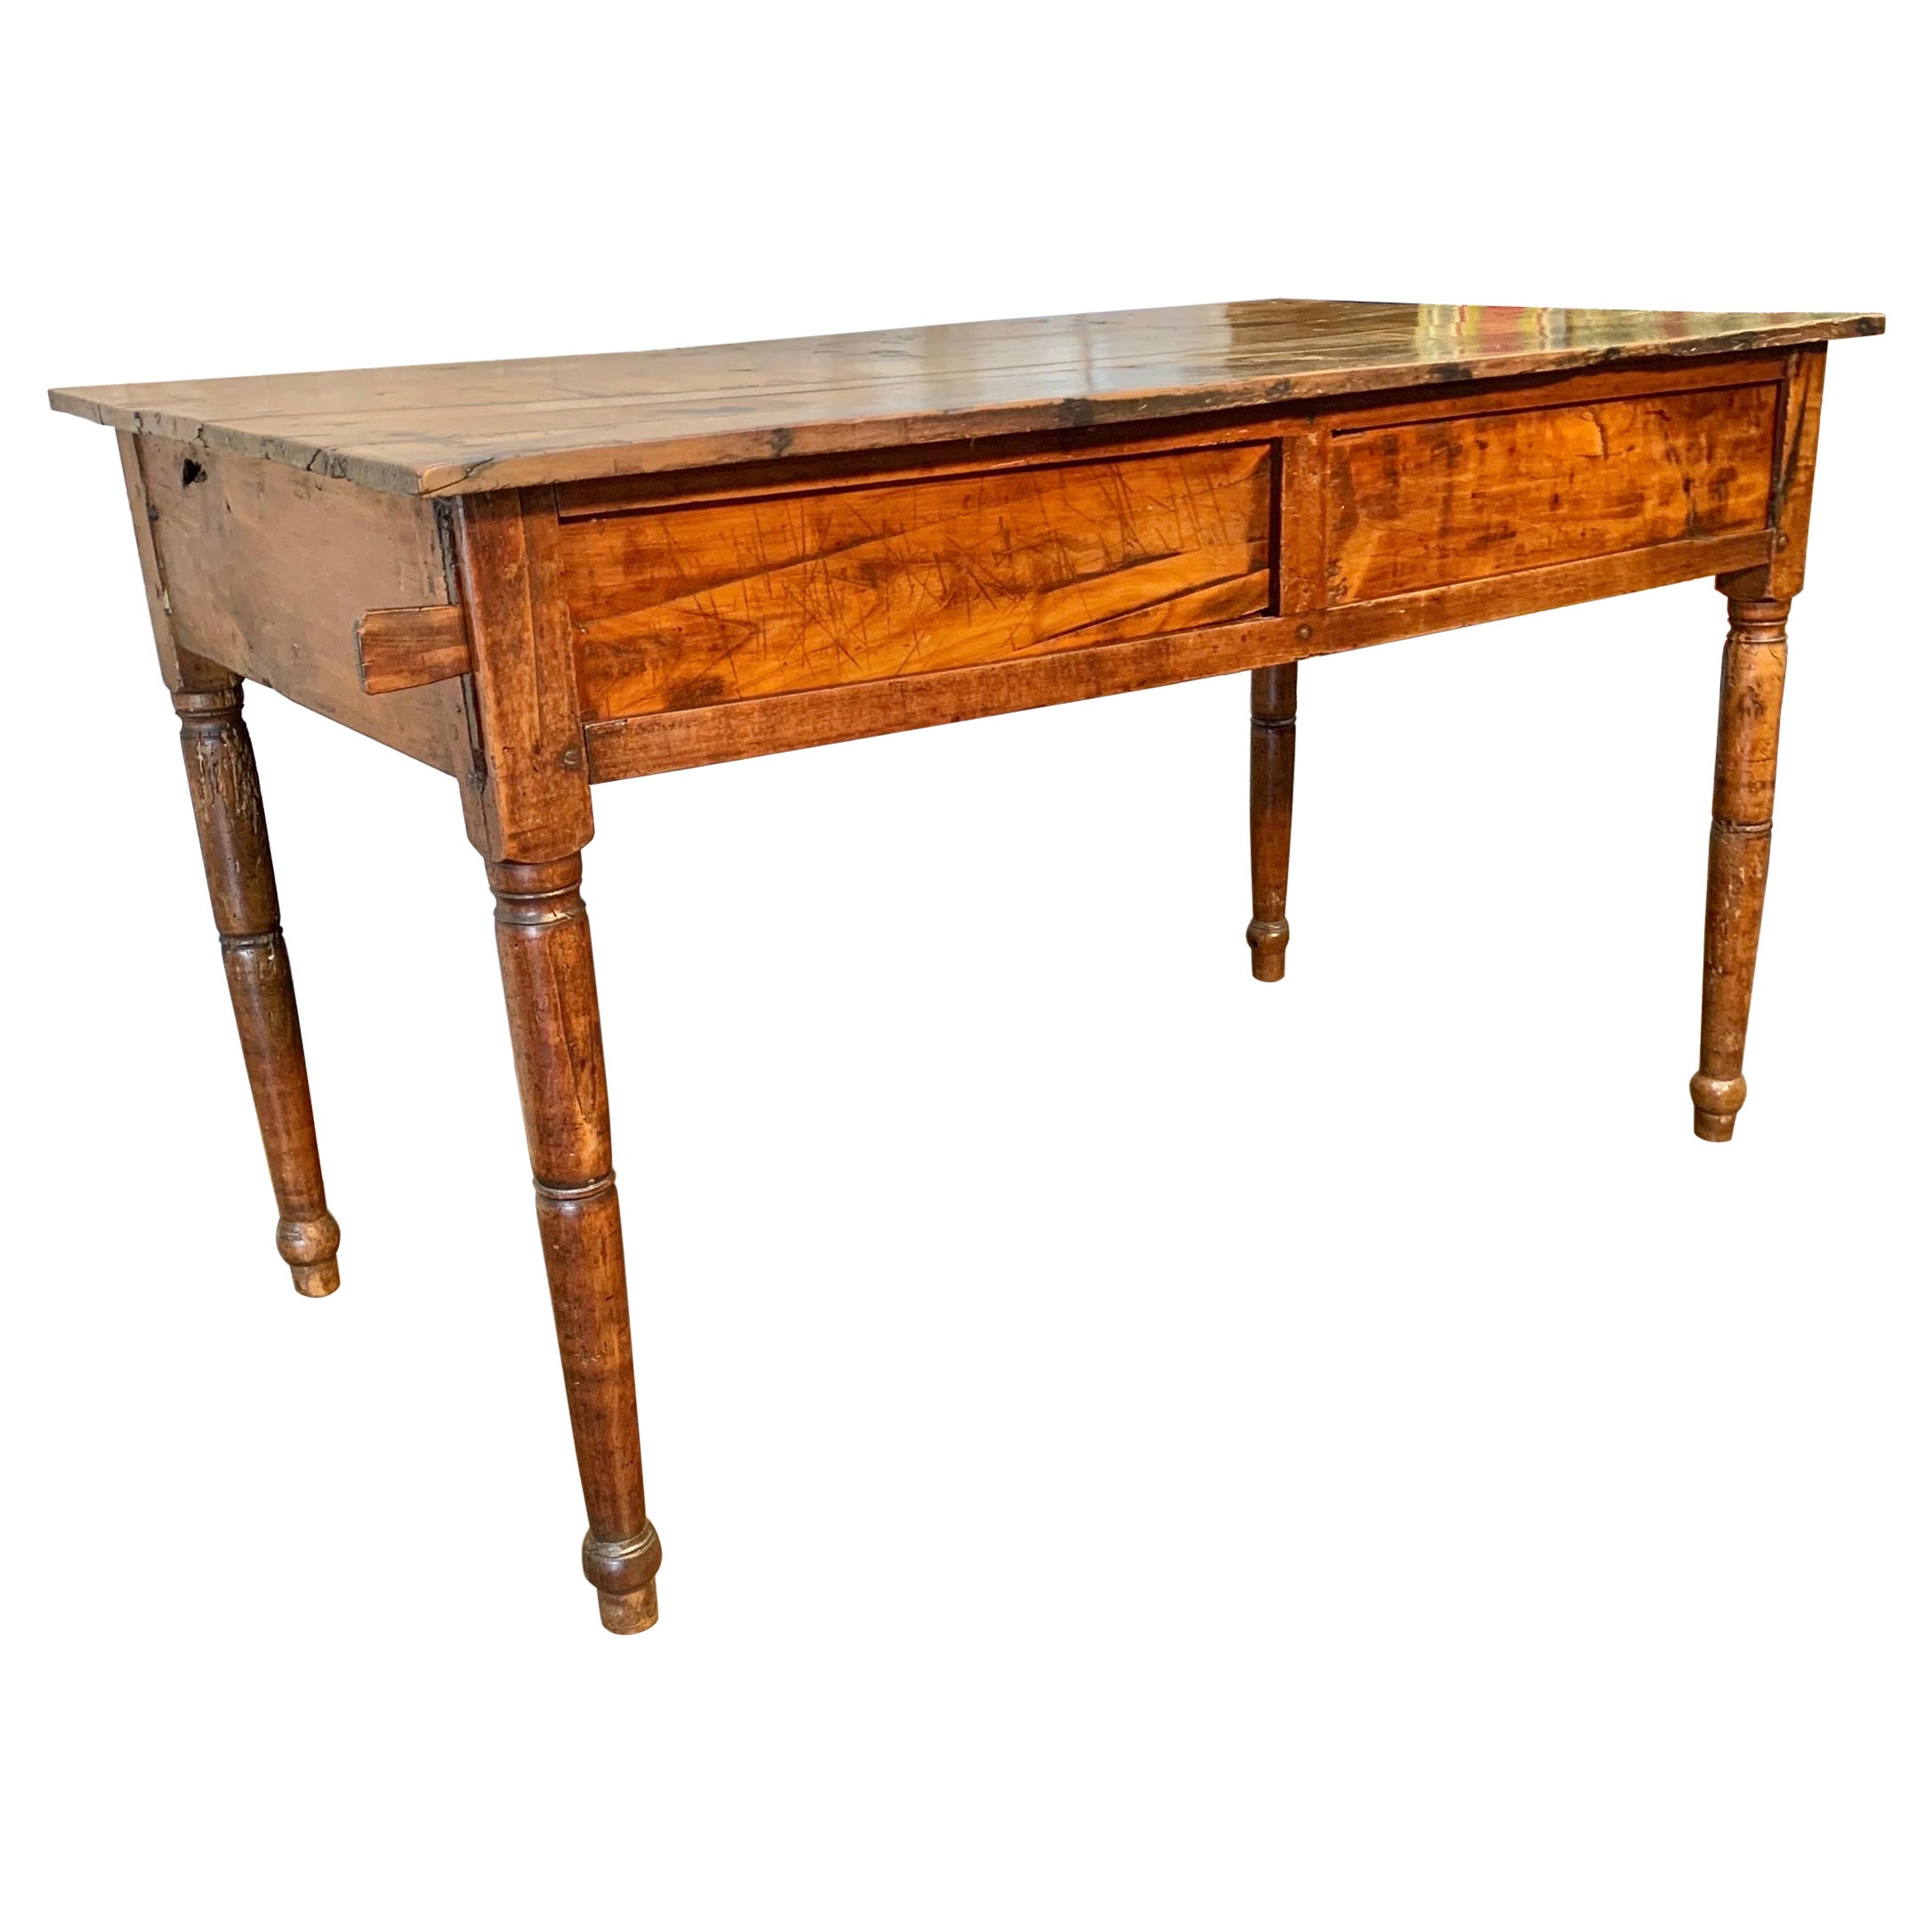 19th Century French Walnut Farm Table With Sliding Panels and Storage For Sale